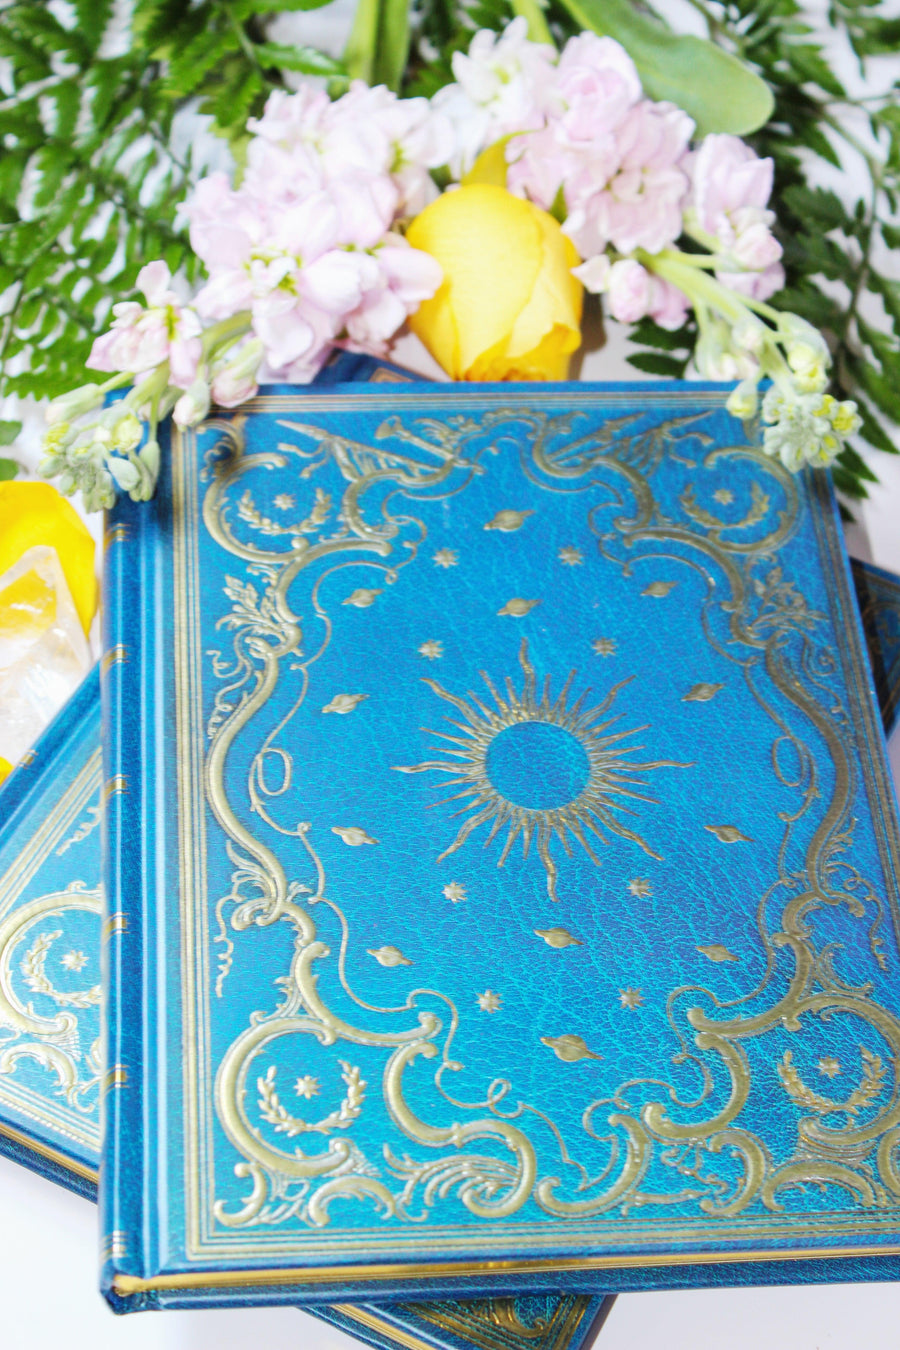 Celestial Dreams Journal - Mythical Lotus